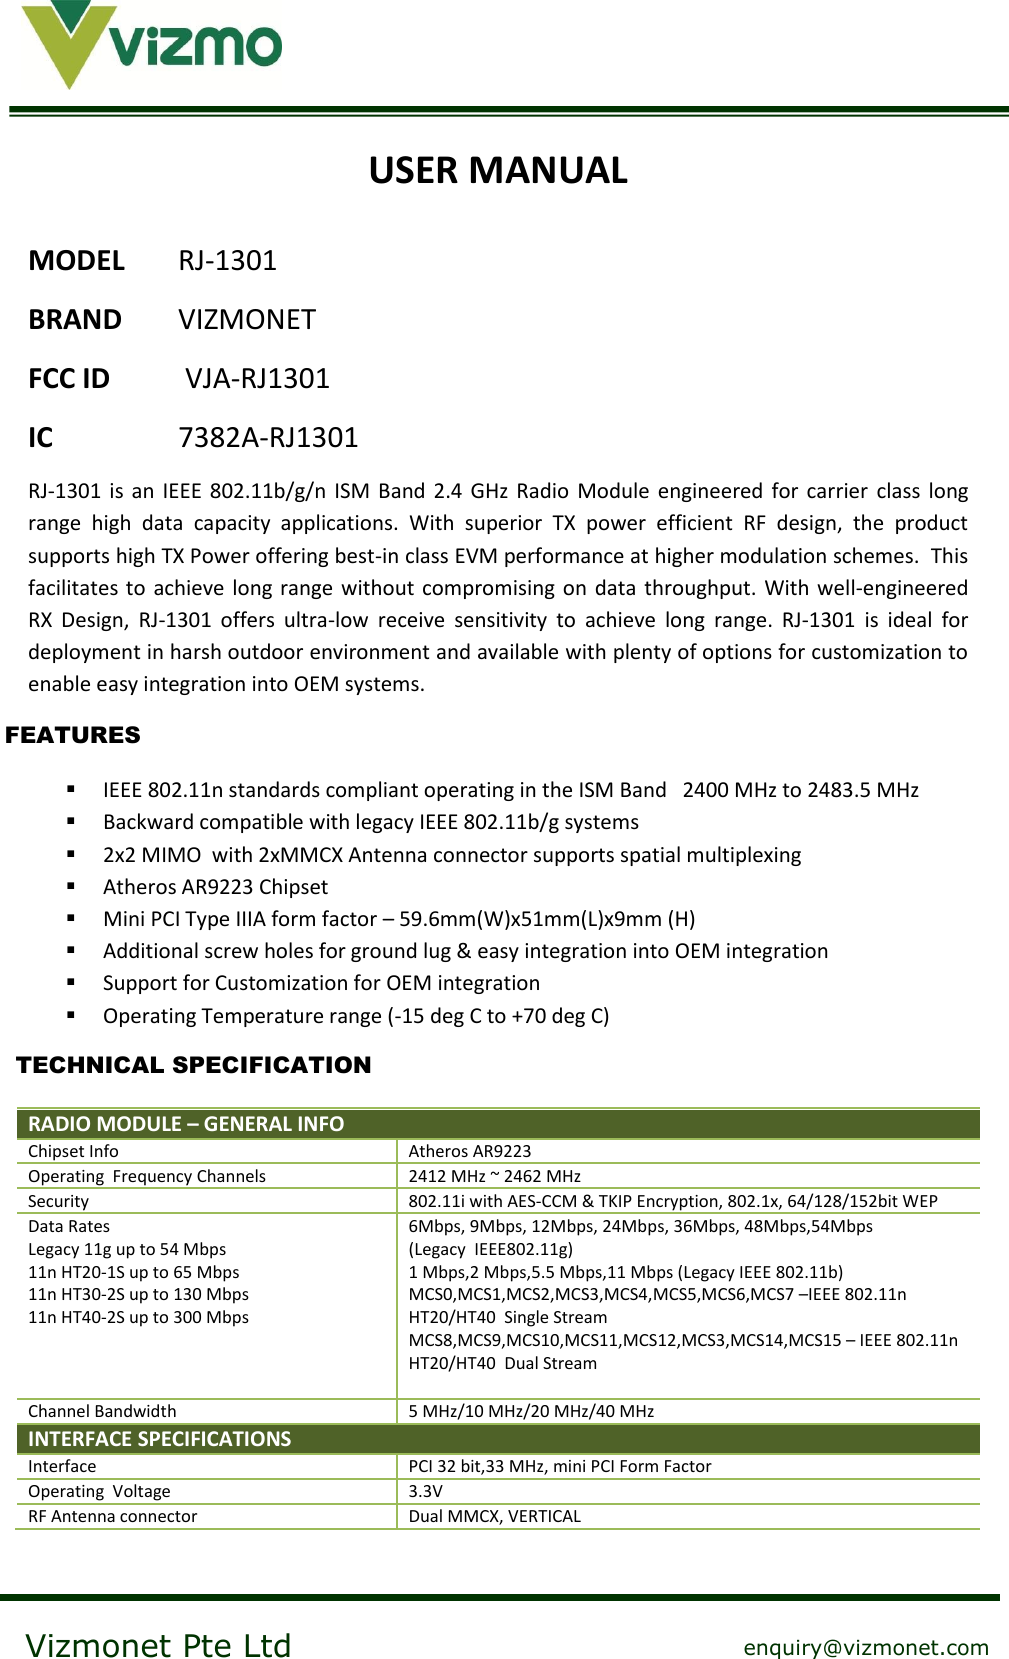    Vizmonet Pte Ltd enquiry@vizmonet.com USER MANUAL MODEL RJ-1301 BRAND  VIZMONET FCC ID  VJA-RJ1301 IC    7382A-RJ1301 RJ-1301  is  an  IEEE  802.11b/g/n  ISM  Band  2.4  GHz  Radio  Module  engineered for carrier  class  long range  high  data  capacity  applications.  With  superior  TX  power  efficient  RF  design,  the  product supports high TX Power offering best-in class EVM performance at higher modulation schemes.  This facilitates to achieve long range without compromising on  data throughput.  With  well-engineered RX  Design,  RJ-1301  offers  ultra-low  receive  sensitivity  to  achieve  long  range.  RJ-1301  is  ideal  for deployment in harsh outdoor environment and available with plenty of options for customization to enable easy integration into OEM systems.   IEEE 802.11n standards compliant operating in the ISM Band   2400 MHz to 2483.5 MHz  Backward compatible with legacy IEEE 802.11b/g systems   2x2 MIMO  with 2xMMCX Antenna connector supports spatial multiplexing  Atheros AR9223 Chipset  Mini PCI Type IIIA form factor – 59.6mm(W)x51mm(L)x9mm (H)  Additional screw holes for ground lug &amp; easy integration into OEM integration  Support for Customization for OEM integration  Operating Temperature range (-15 deg C to +70 deg C)  RADIO MODULE – GENERAL INFO  Chipset Info Atheros AR9223 Operating  Frequency Channels 2412 MHz ~ 2462 MHz Security 802.11i with AES-CCM &amp; TKIP Encryption, 802.1x, 64/128/152bit WEP Data Rates Legacy 11g up to 54 Mbps 11n HT20-1S up to 65 Mbps 11n HT30-2S up to 130 Mbps 11n HT40-2S up to 300 Mbps 6Mbps, 9Mbps, 12Mbps, 24Mbps, 36Mbps, 48Mbps,54Mbps   (Legacy  IEEE802.11g) 1 Mbps,2 Mbps,5.5 Mbps,11 Mbps (Legacy IEEE 802.11b) MCS0,MCS1,MCS2,MCS3,MCS4,MCS5,MCS6,MCS7 –IEEE 802.11n  HT20/HT40  Single Stream MCS8,MCS9,MCS10,MCS11,MCS12,MCS3,MCS14,MCS15 – IEEE 802.11n  HT20/HT40  Dual Stream  Channel Bandwidth 5 MHz/10 MHz/20 MHz/40 MHz INTERFACE SPECIFICATIONS  Interface PCI 32 bit,33 MHz, mini PCI Form Factor Operating  Voltage 3.3V RF Antenna connector Dual MMCX, VERTICAL  FEATURES TECHNICAL SPECIFICATION 